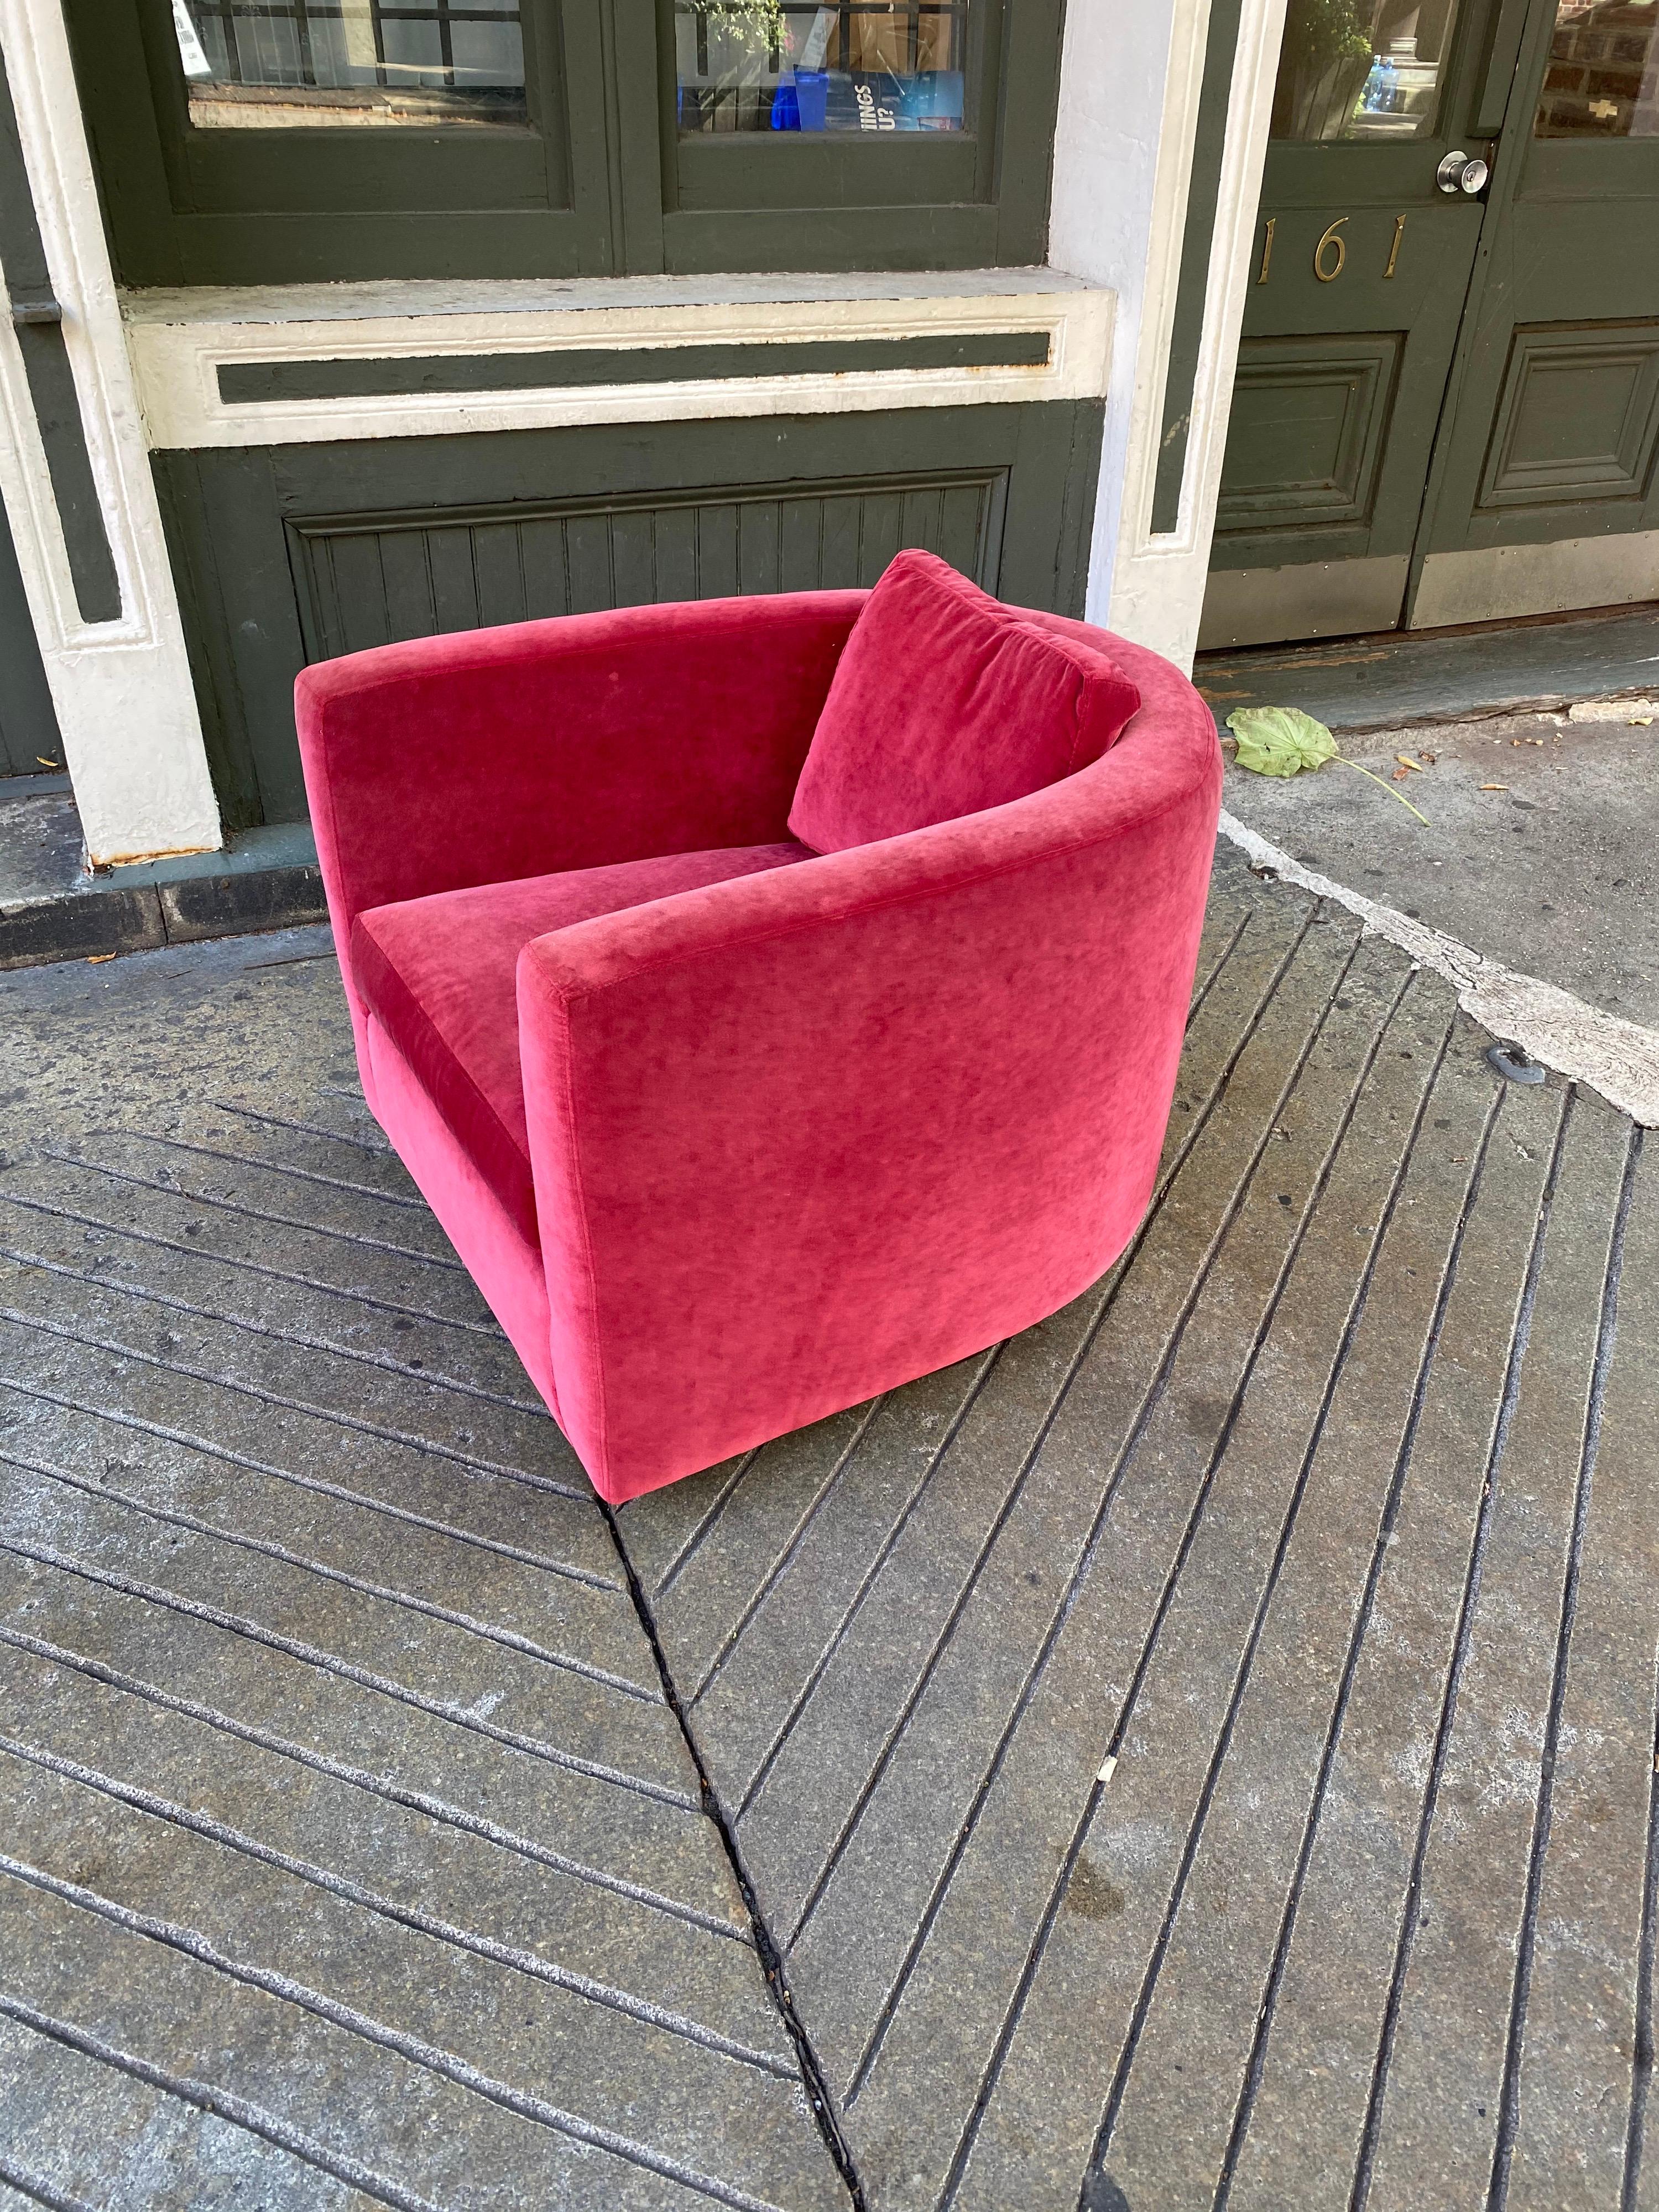 Extra deep swivel tub chair. Very sleek profile with an exaggerated deep seat. Seats very well with the small back pillow for your back. Covered in a strawberry velvet. Chair probably dates from the late 1970s, fabric I believe is original and looks